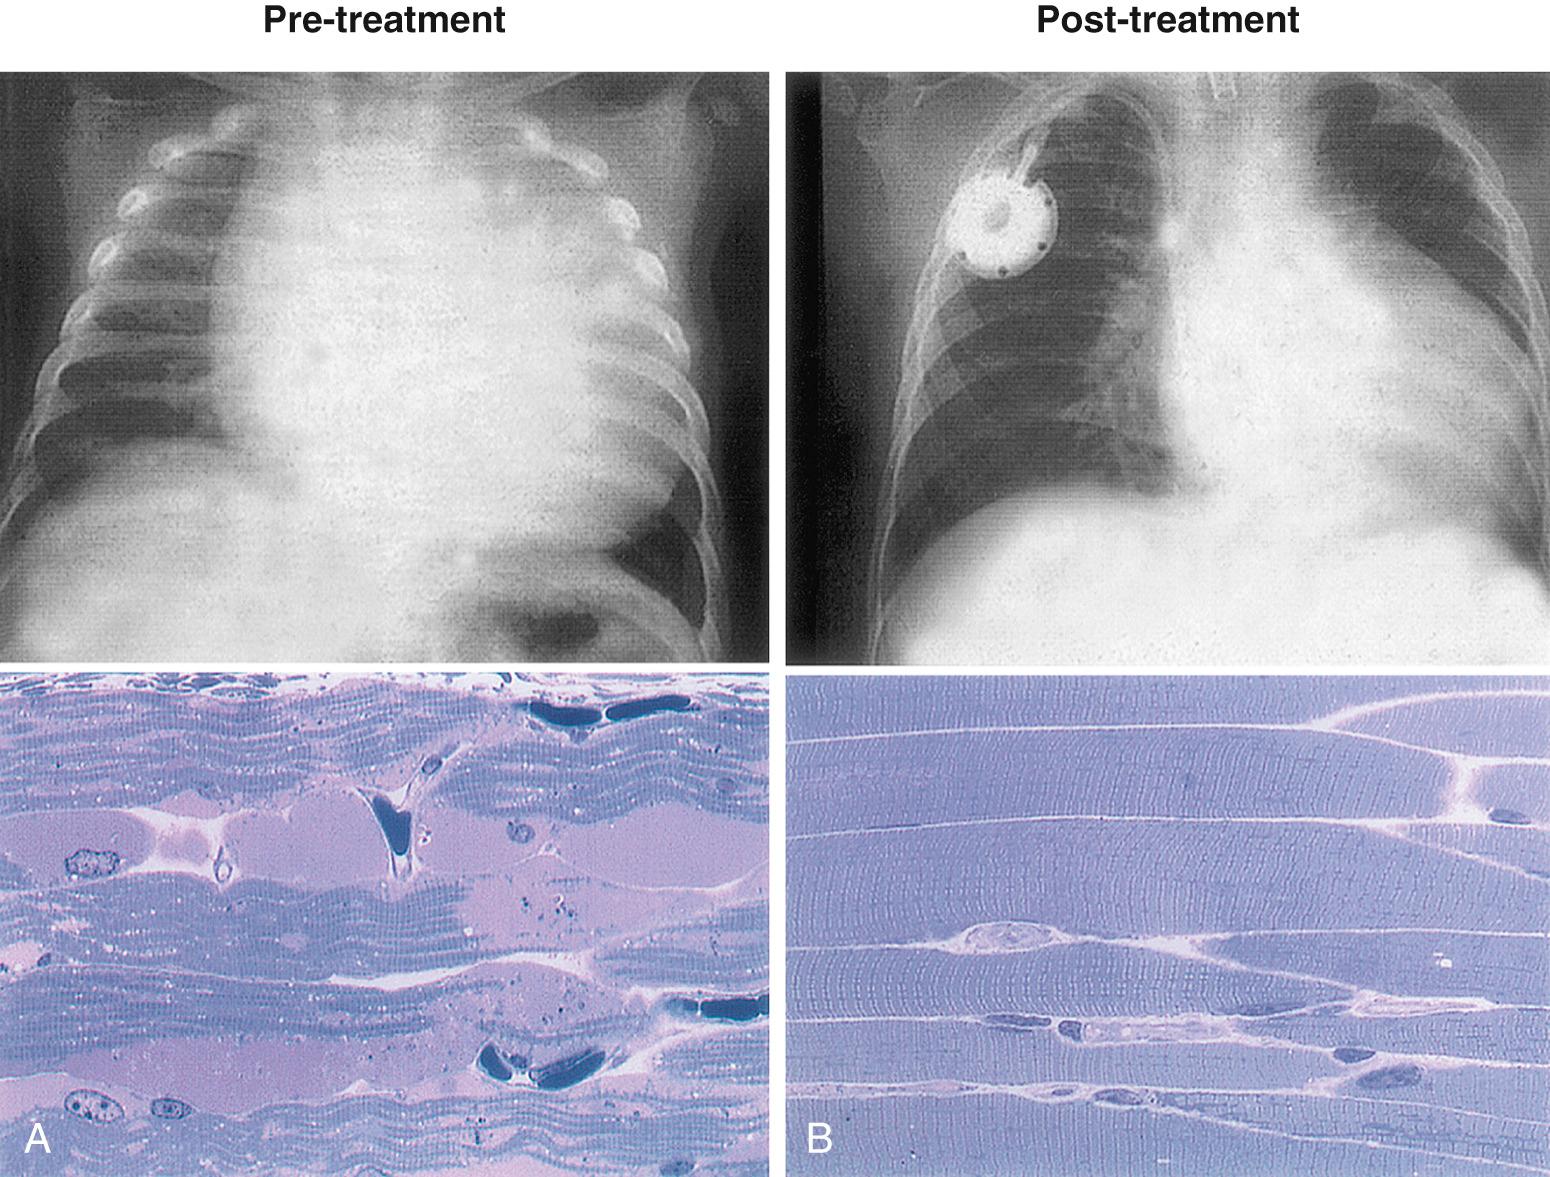 Fig. 105.3, Chest radiograph and muscle histology findings of an infantile-onset Pompe disease patient before ( A ) and after ( B ) enzyme replacement therapy. Note the decrease in heart size and muscle glycogen with the therapy.